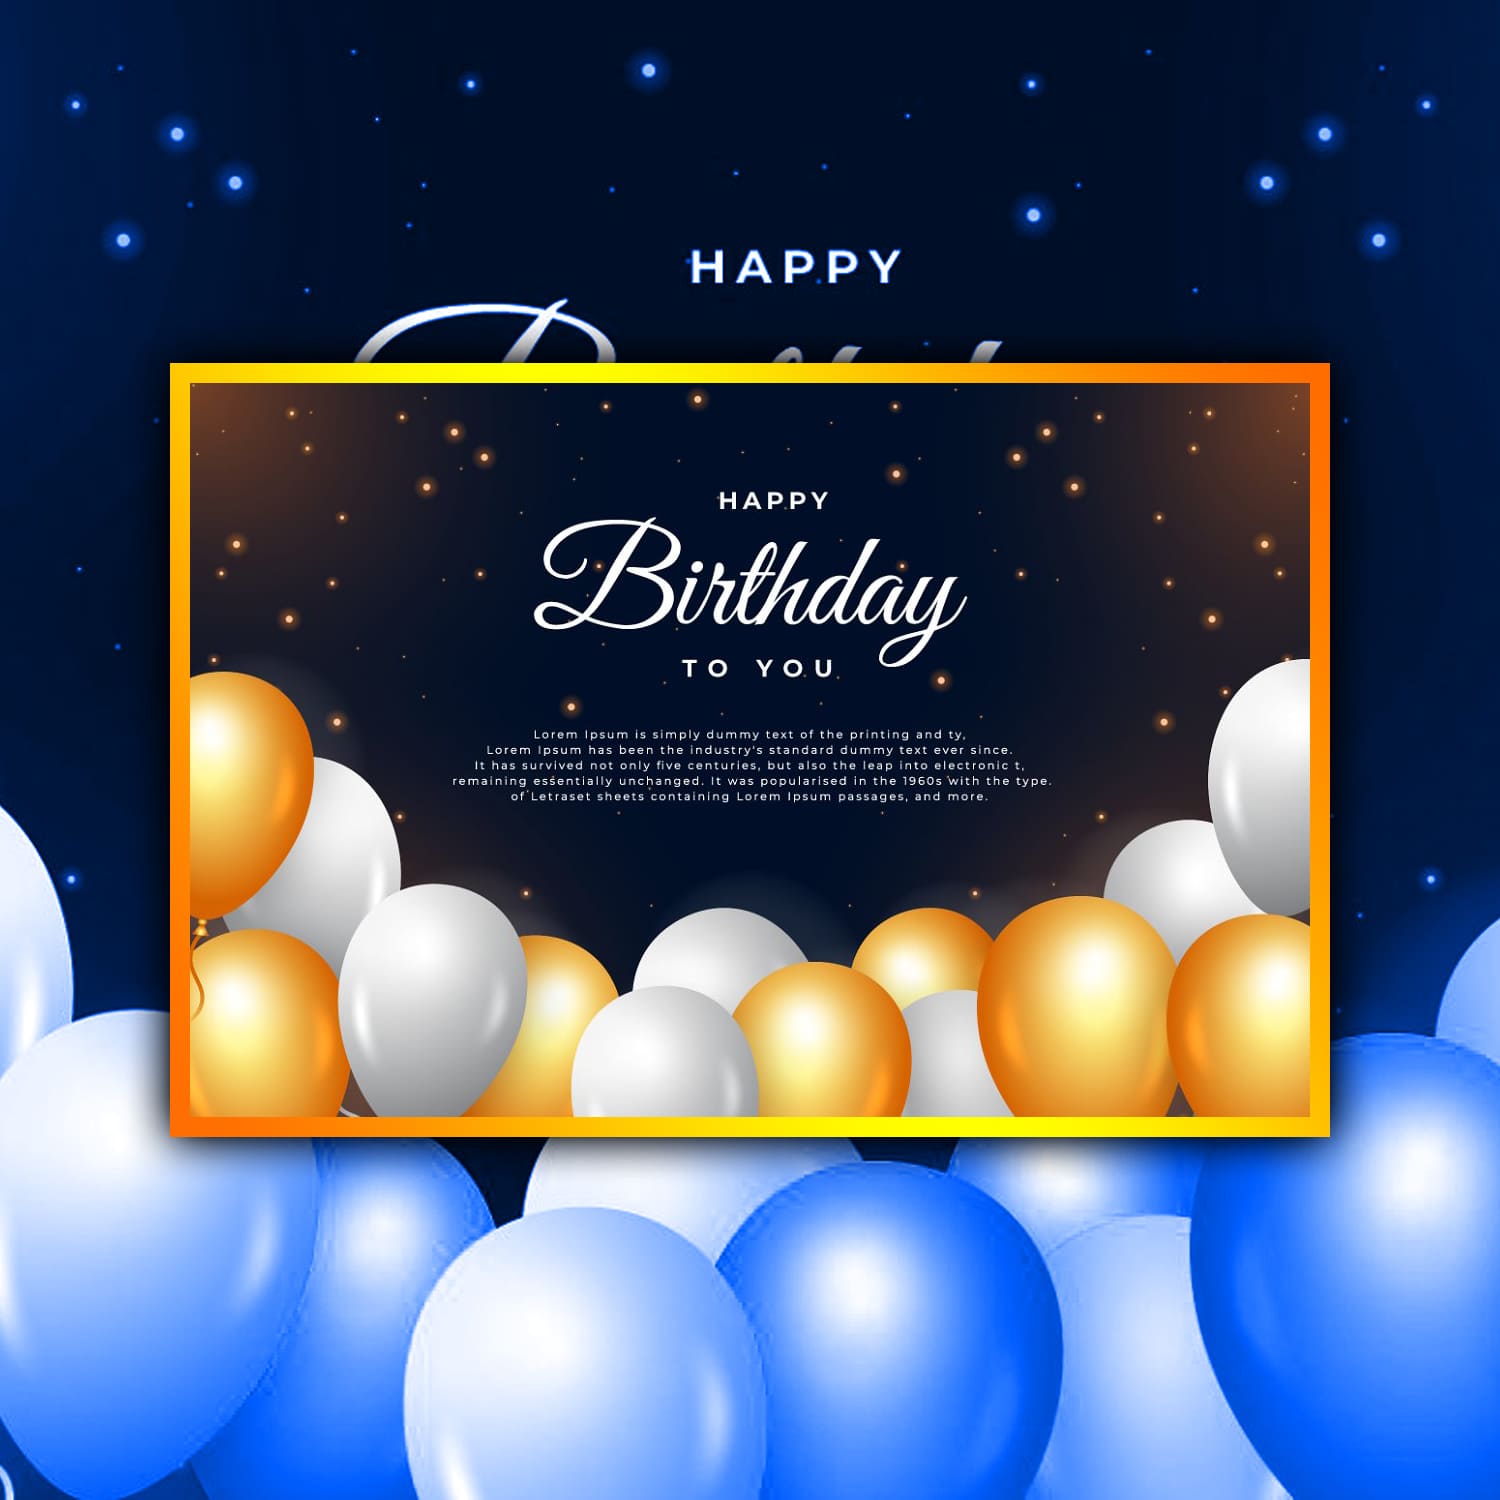 Happy birthday banner with confetti, first picture 1500x1500.